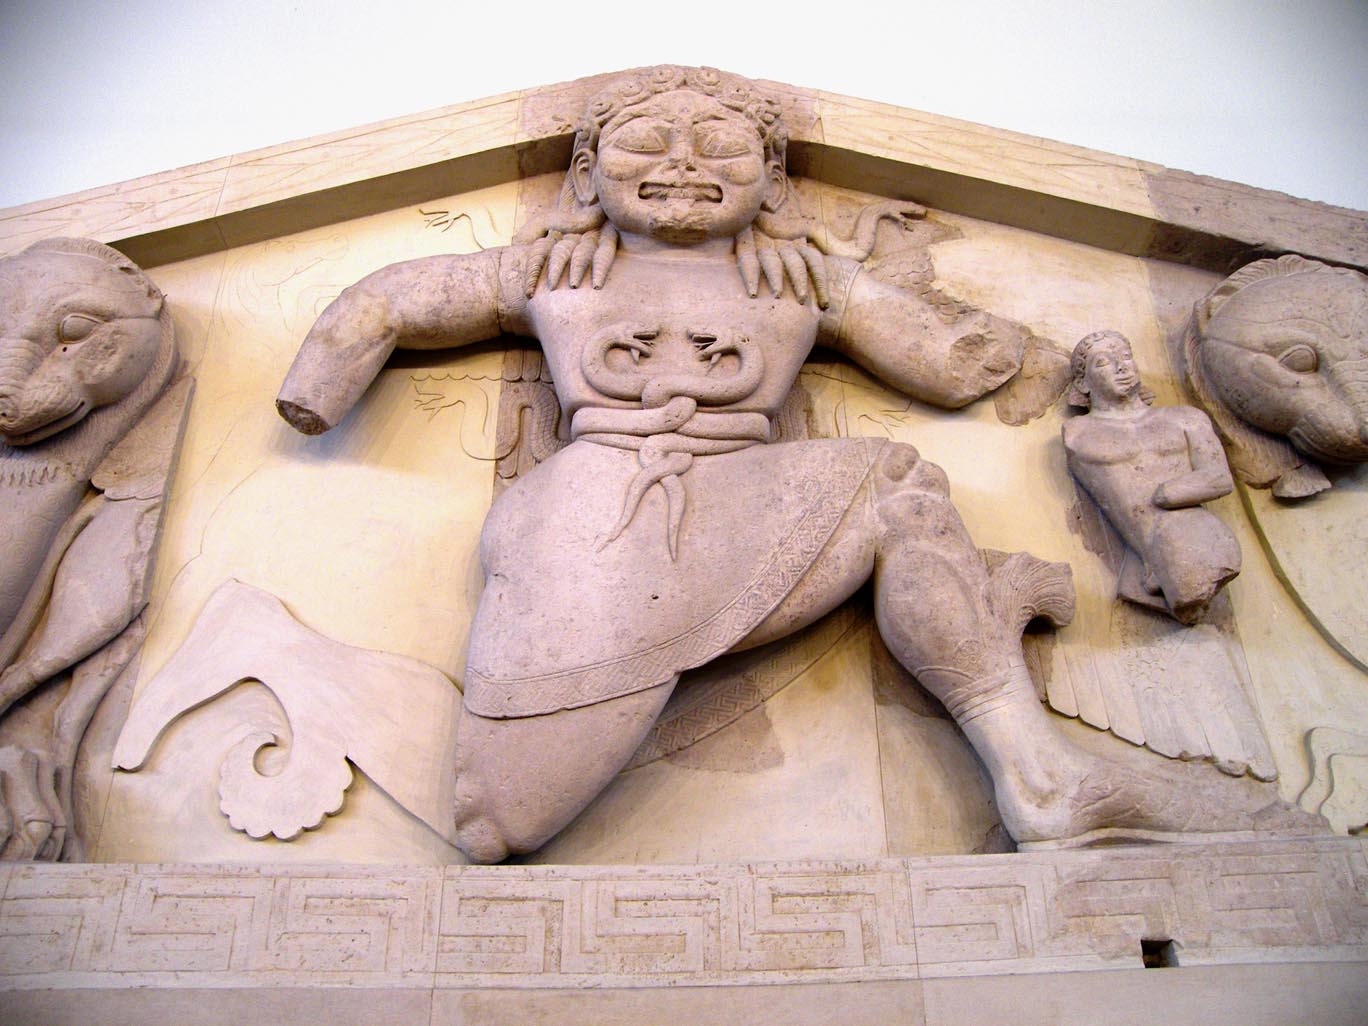 An archaic Gorgon (around 580 BC), as depicted on a pediment from the temple of Artemis in Corfu, on display at the Archaeological Museum of Corfu. (https://commons.wikimedia.org/w/index.php?curid=16700263)